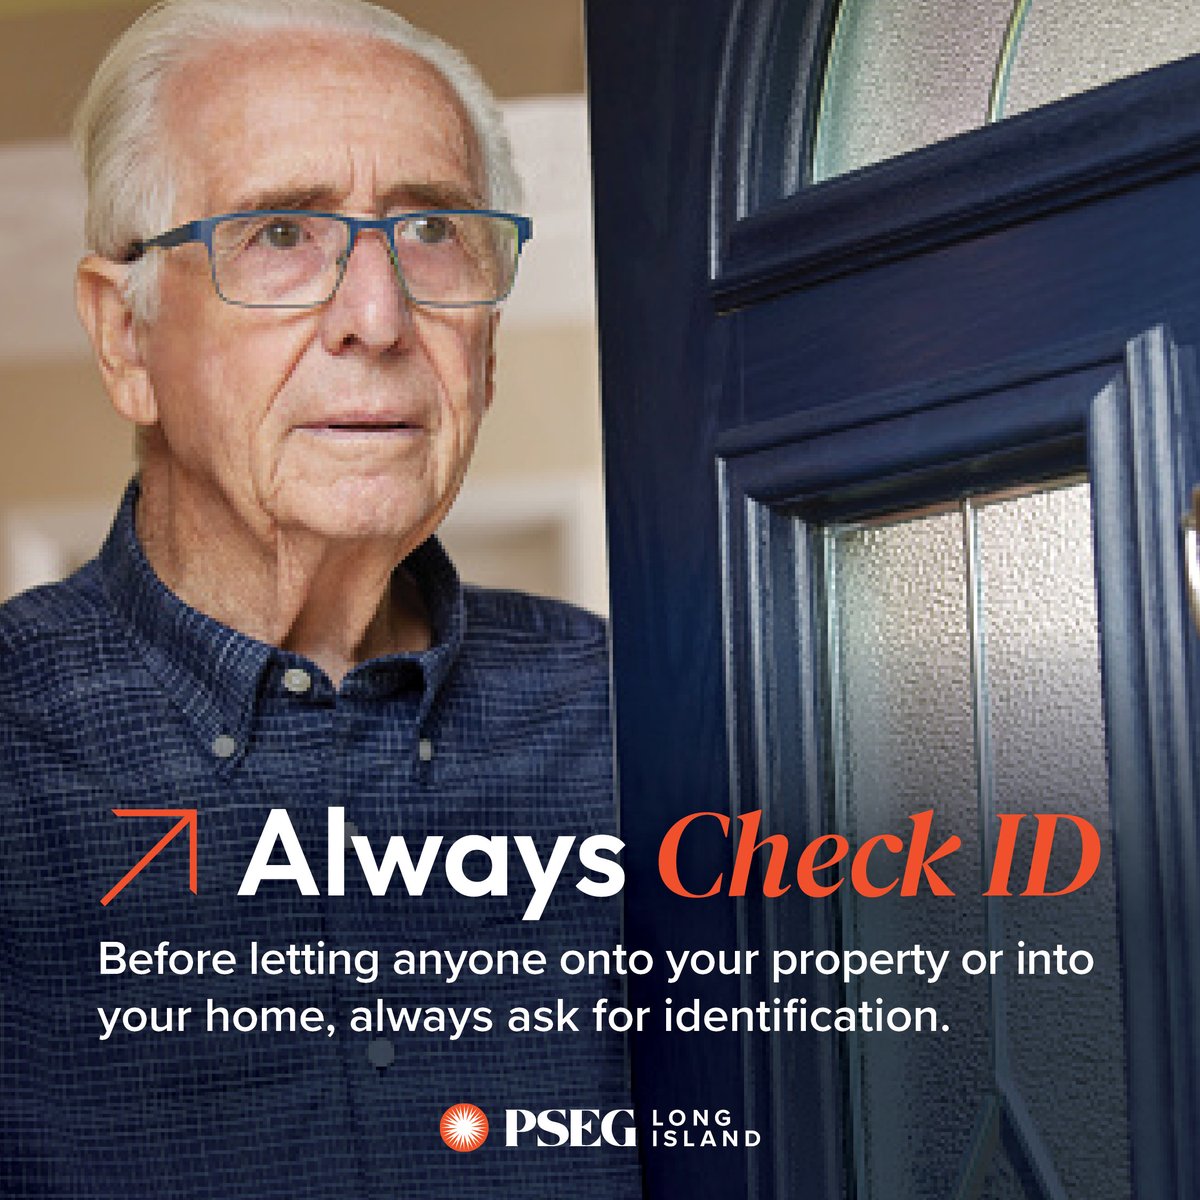 Before letting anyone onto your property or into your home, always ask for ID. All #PSEGLI employees must carry + present ID. If you are not convinced, do not let the person in your house. Call us at 1-800-490-0025. A rep will verify if someone was dispatched to your location.